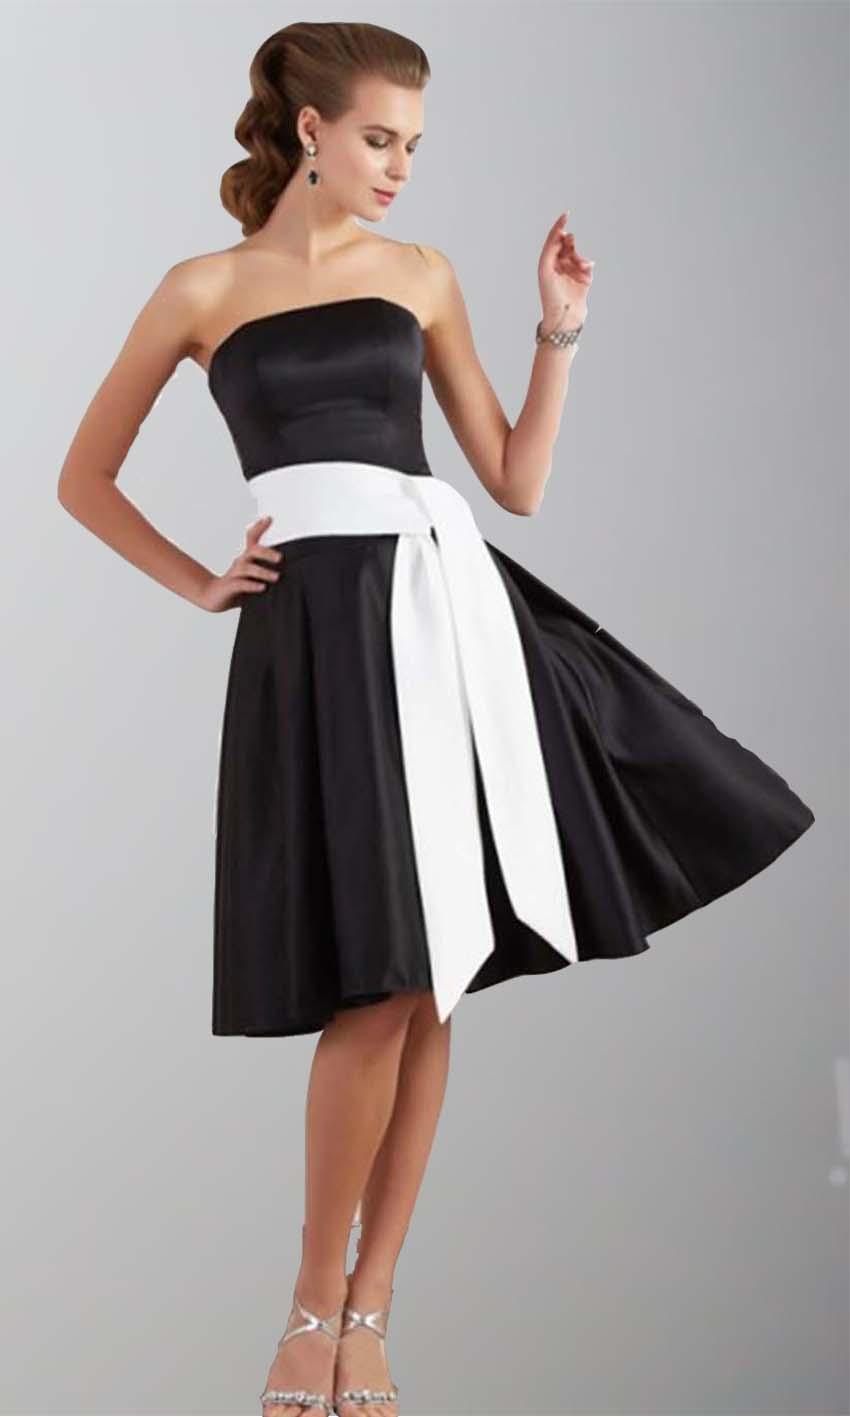 Hochzeit - Classic Black Strapless Short Bridesmaid Dresses KSP342 [KSP342] - £76.00 : Cheap Prom Dresses Uk, Bridesmaid Dresses, 2014 Prom & Evening Dresses, Look for cheap elegant prom dresses 2014, cocktail gowns, or dresses for special occasions? kissprom.co.uk 